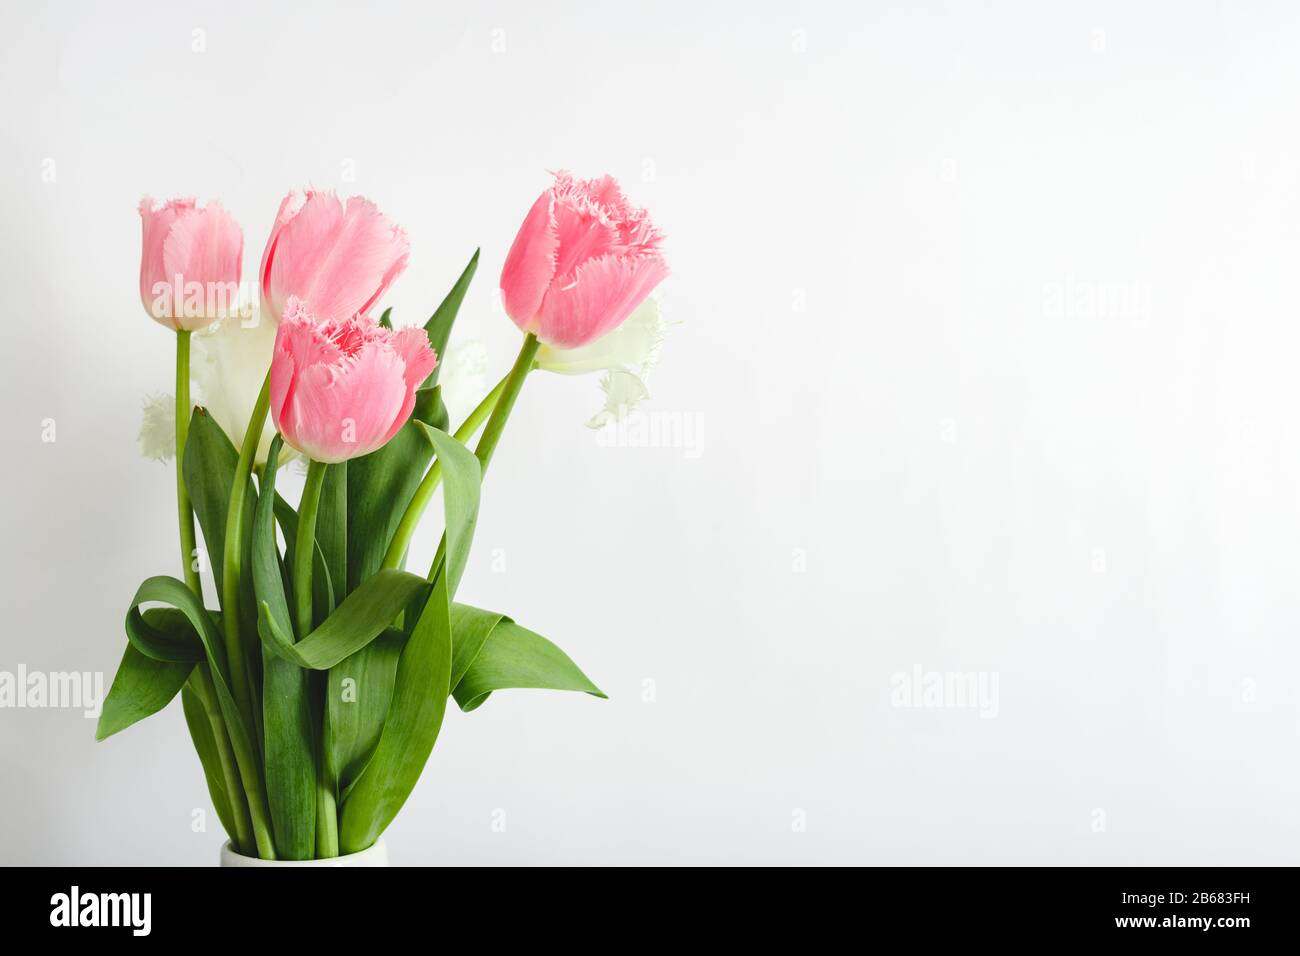 Pink tulips bouquet on white background with copy space. Bouquet of Beautiful pink and white spring tulips flowers for Mothers Day, Valentine Day Stock Photo